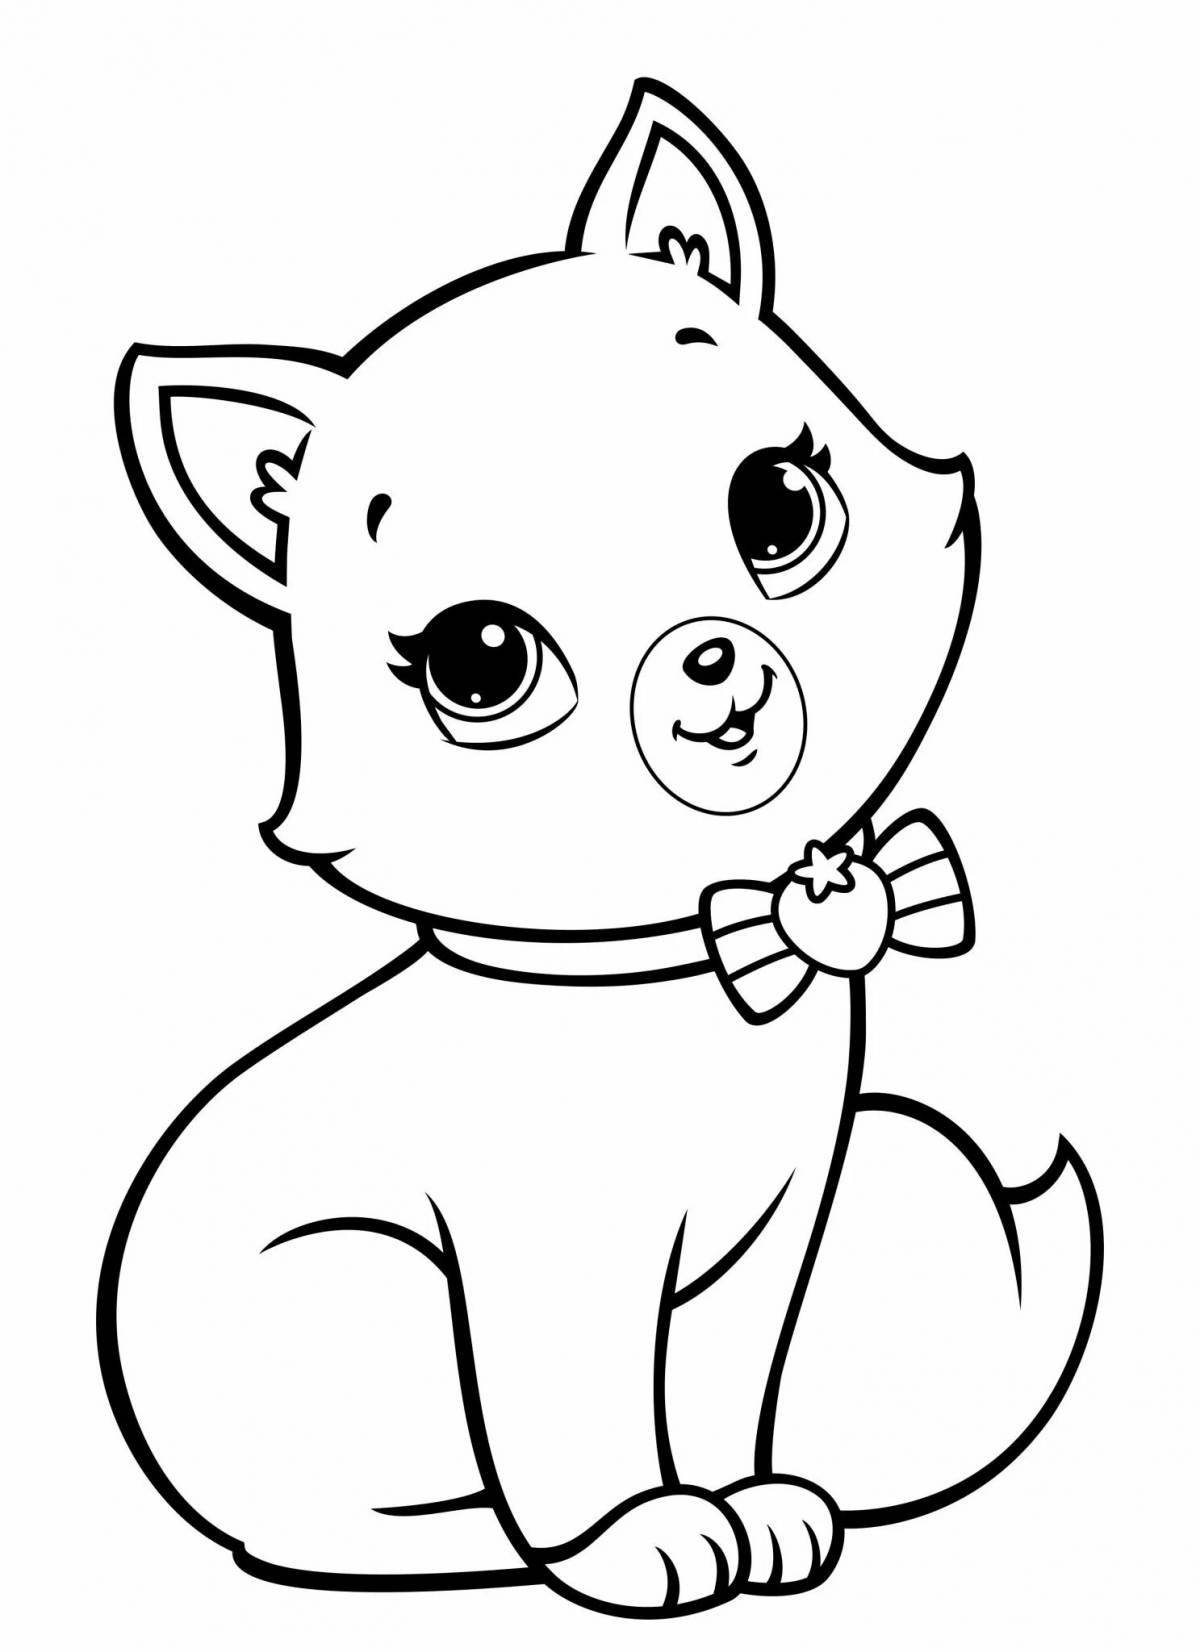 Blissful kitten and dog coloring page